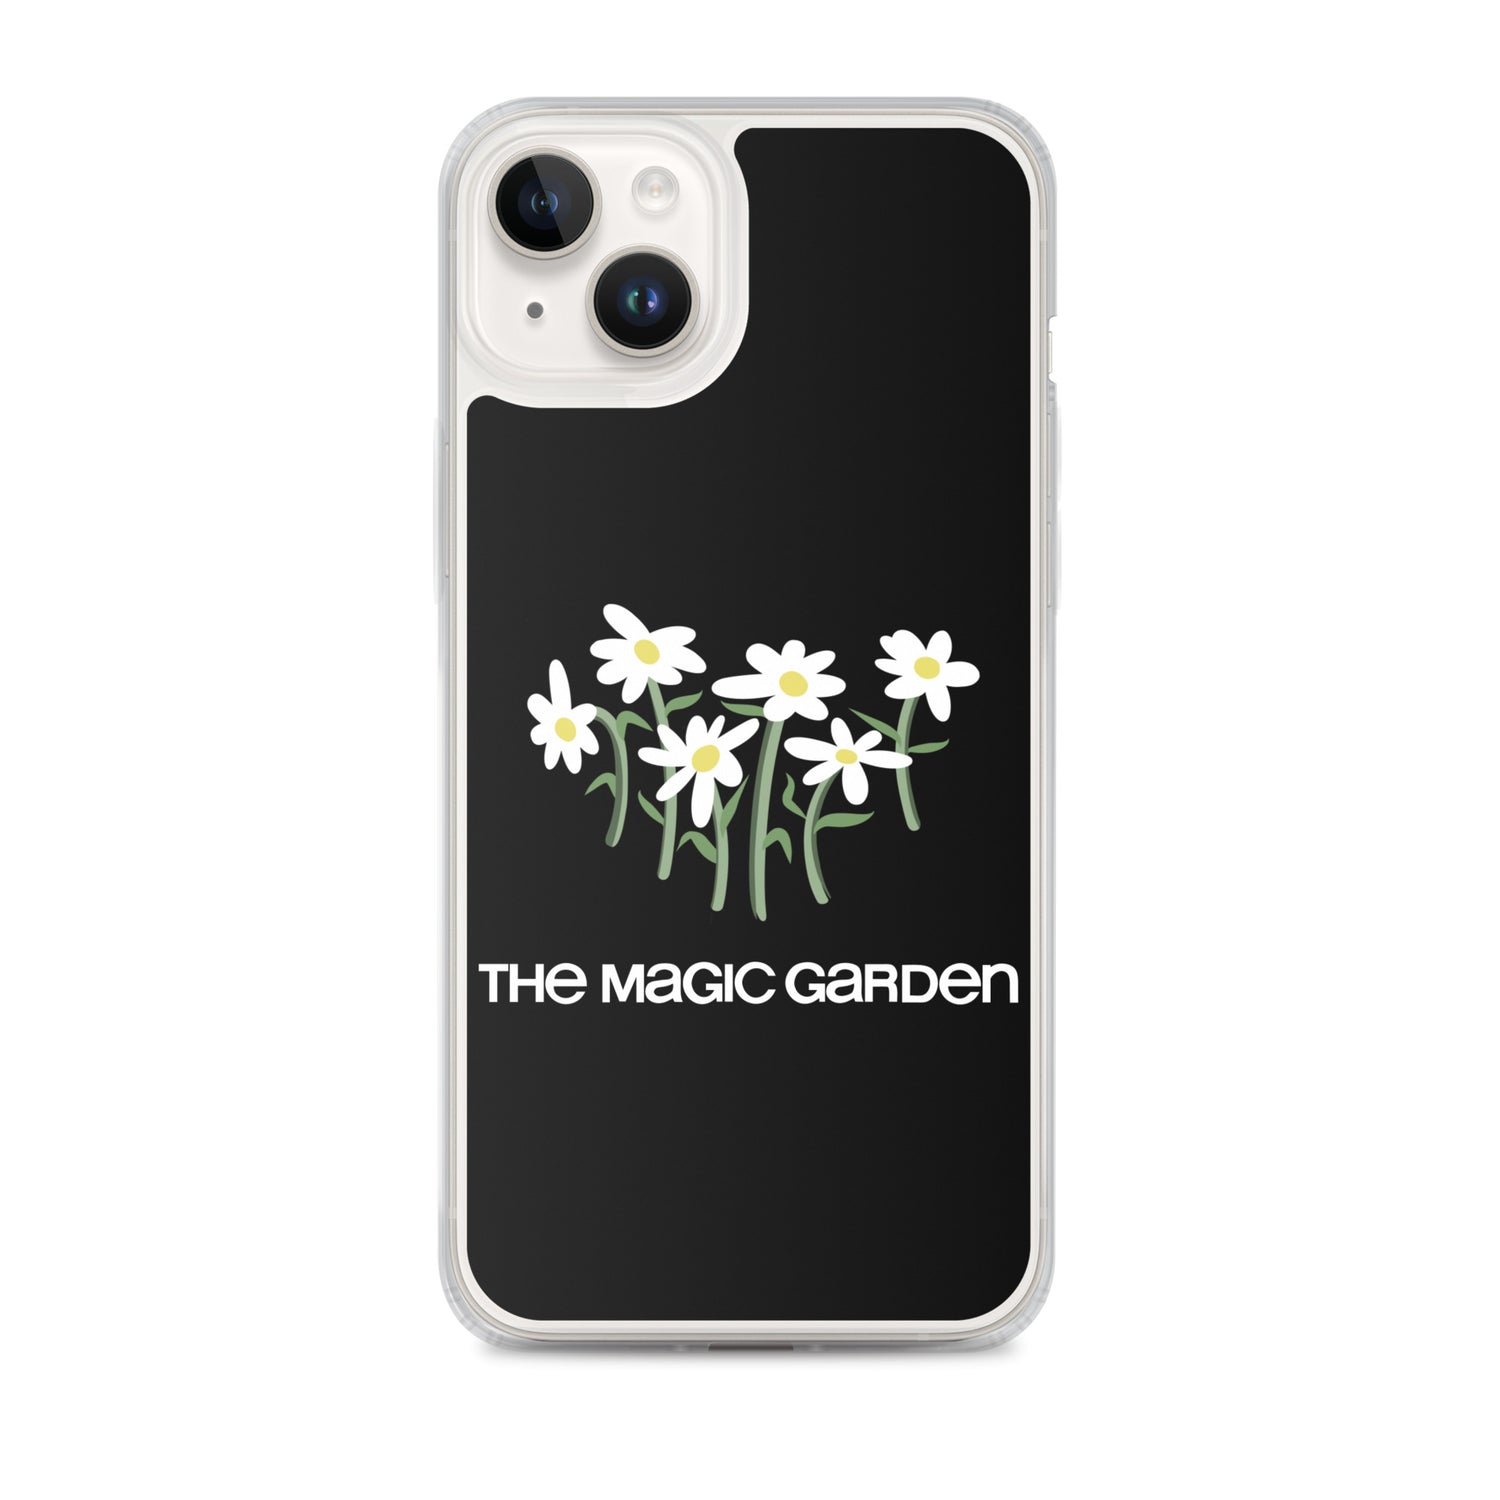 TMG Jesters iPhone Cover, Black